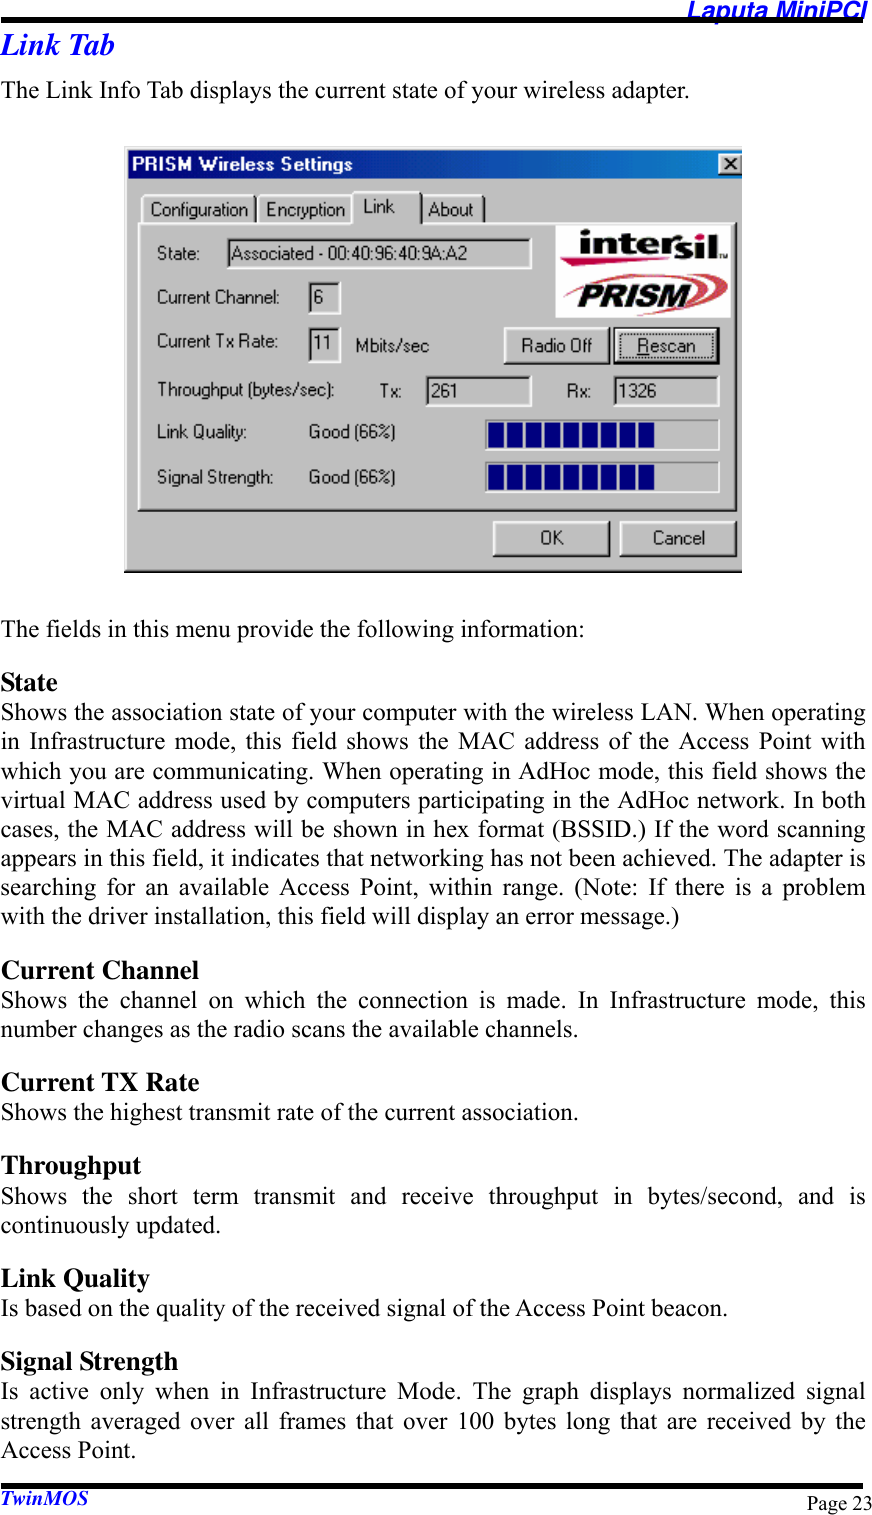   Laputa MiniPCI TwinMOS  Page 23Link Tab The Link Info Tab displays the current state of your wireless adapter.  The fields in this menu provide the following information: State Shows the association state of your computer with the wireless LAN. When operating in Infrastructure mode, this field shows the MAC address of the Access Point with which you are communicating. When operating in AdHoc mode, this field shows the virtual MAC address used by computers participating in the AdHoc network. In both cases, the MAC address will be shown in hex format (BSSID.) If the word scanning appears in this field, it indicates that networking has not been achieved. The adapter is searching for an available Access Point, within range. (Note: If there is a problem with the driver installation, this field will display an error message.) Current Channel Shows the channel on which the connection is made. In Infrastructure mode, this number changes as the radio scans the available channels. Current TX Rate Shows the highest transmit rate of the current association. Throughput Shows the short term transmit and receive throughput in bytes/second, and is continuously updated. Link Quality Is based on the quality of the received signal of the Access Point beacon. Signal Strength Is active only when in Infrastructure Mode. The graph displays normalized signal strength averaged over all frames that over 100 bytes long that are received by the Access Point. 